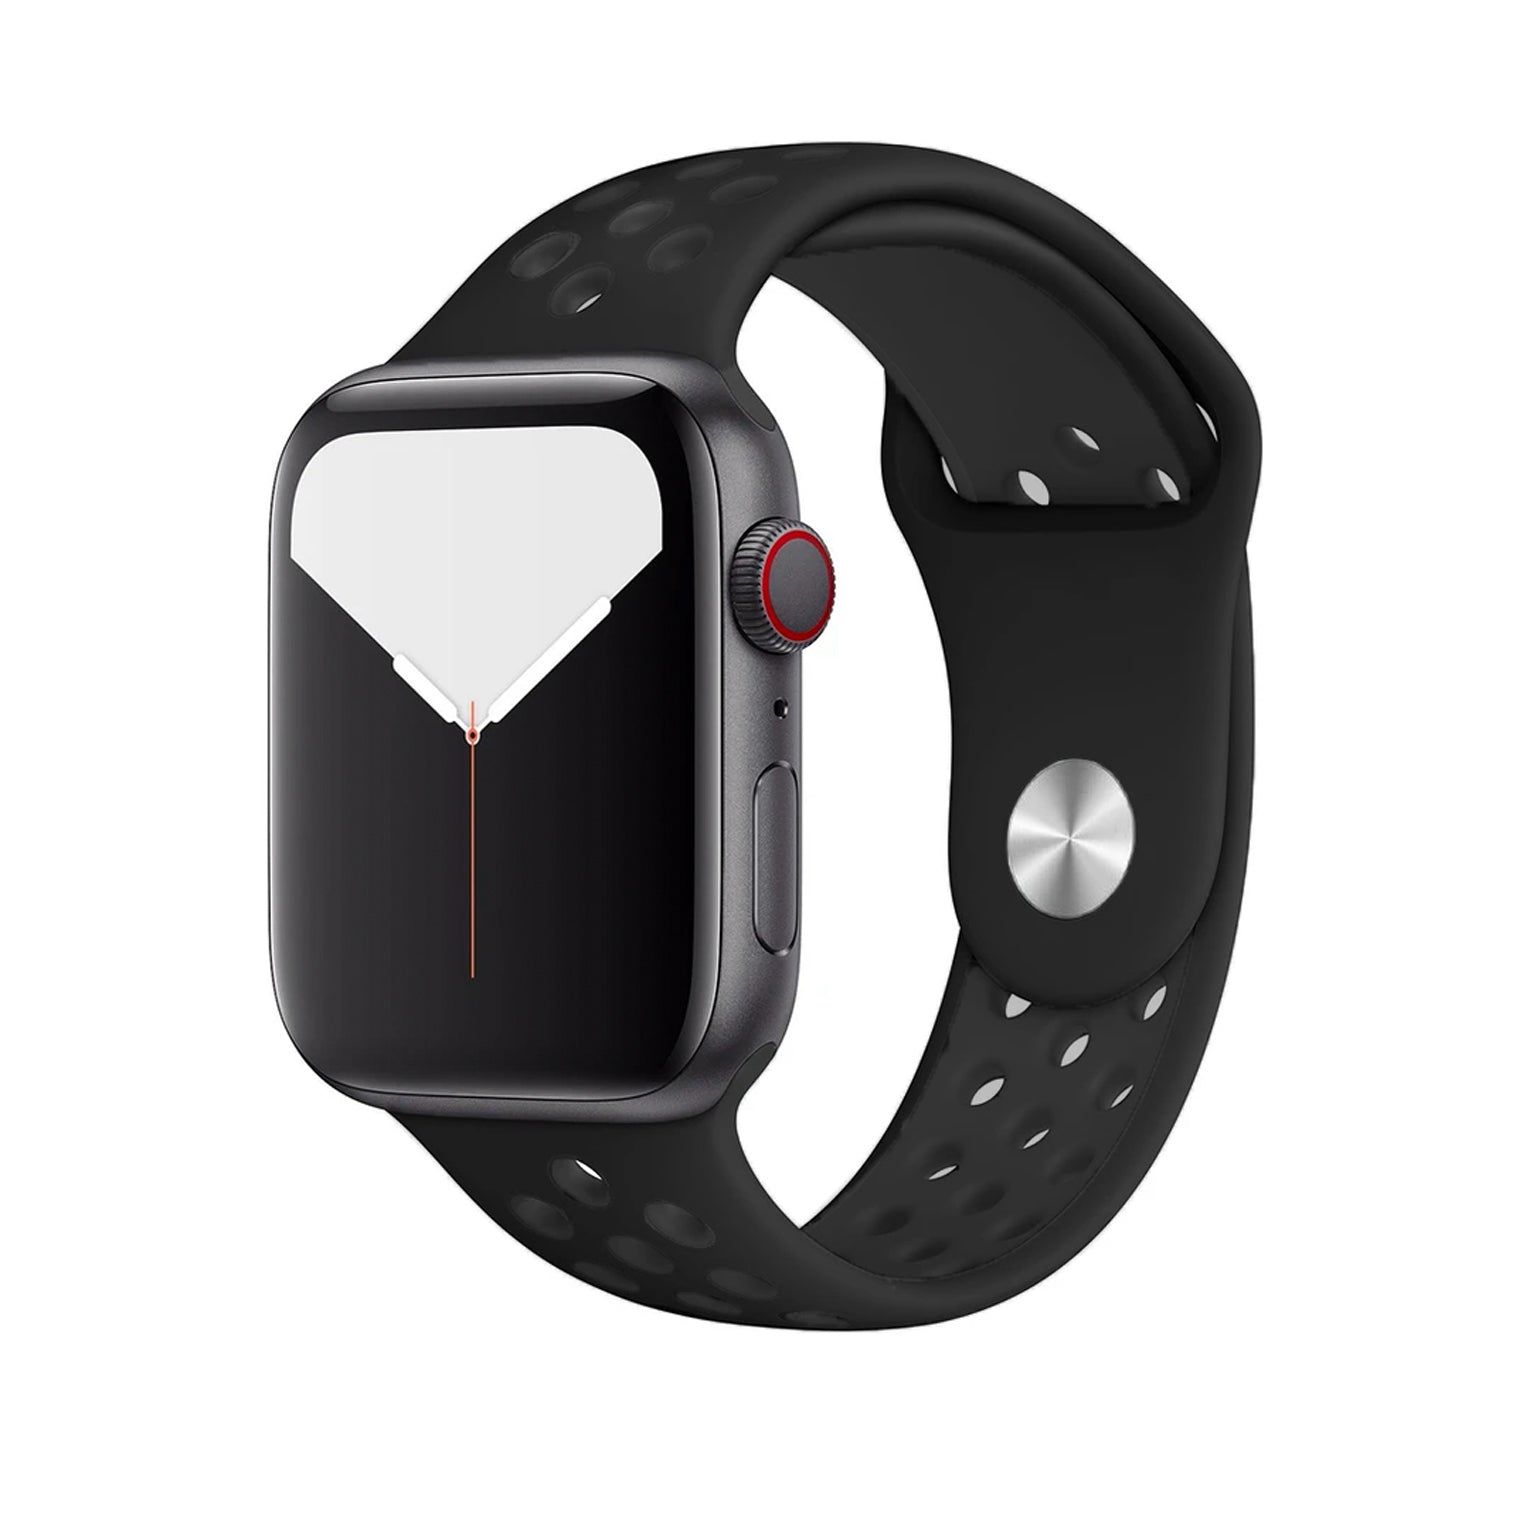 Black/Anthracite Silicone Sport Strap for Apple Watch Silicone Bands   Accessories Gifts UK